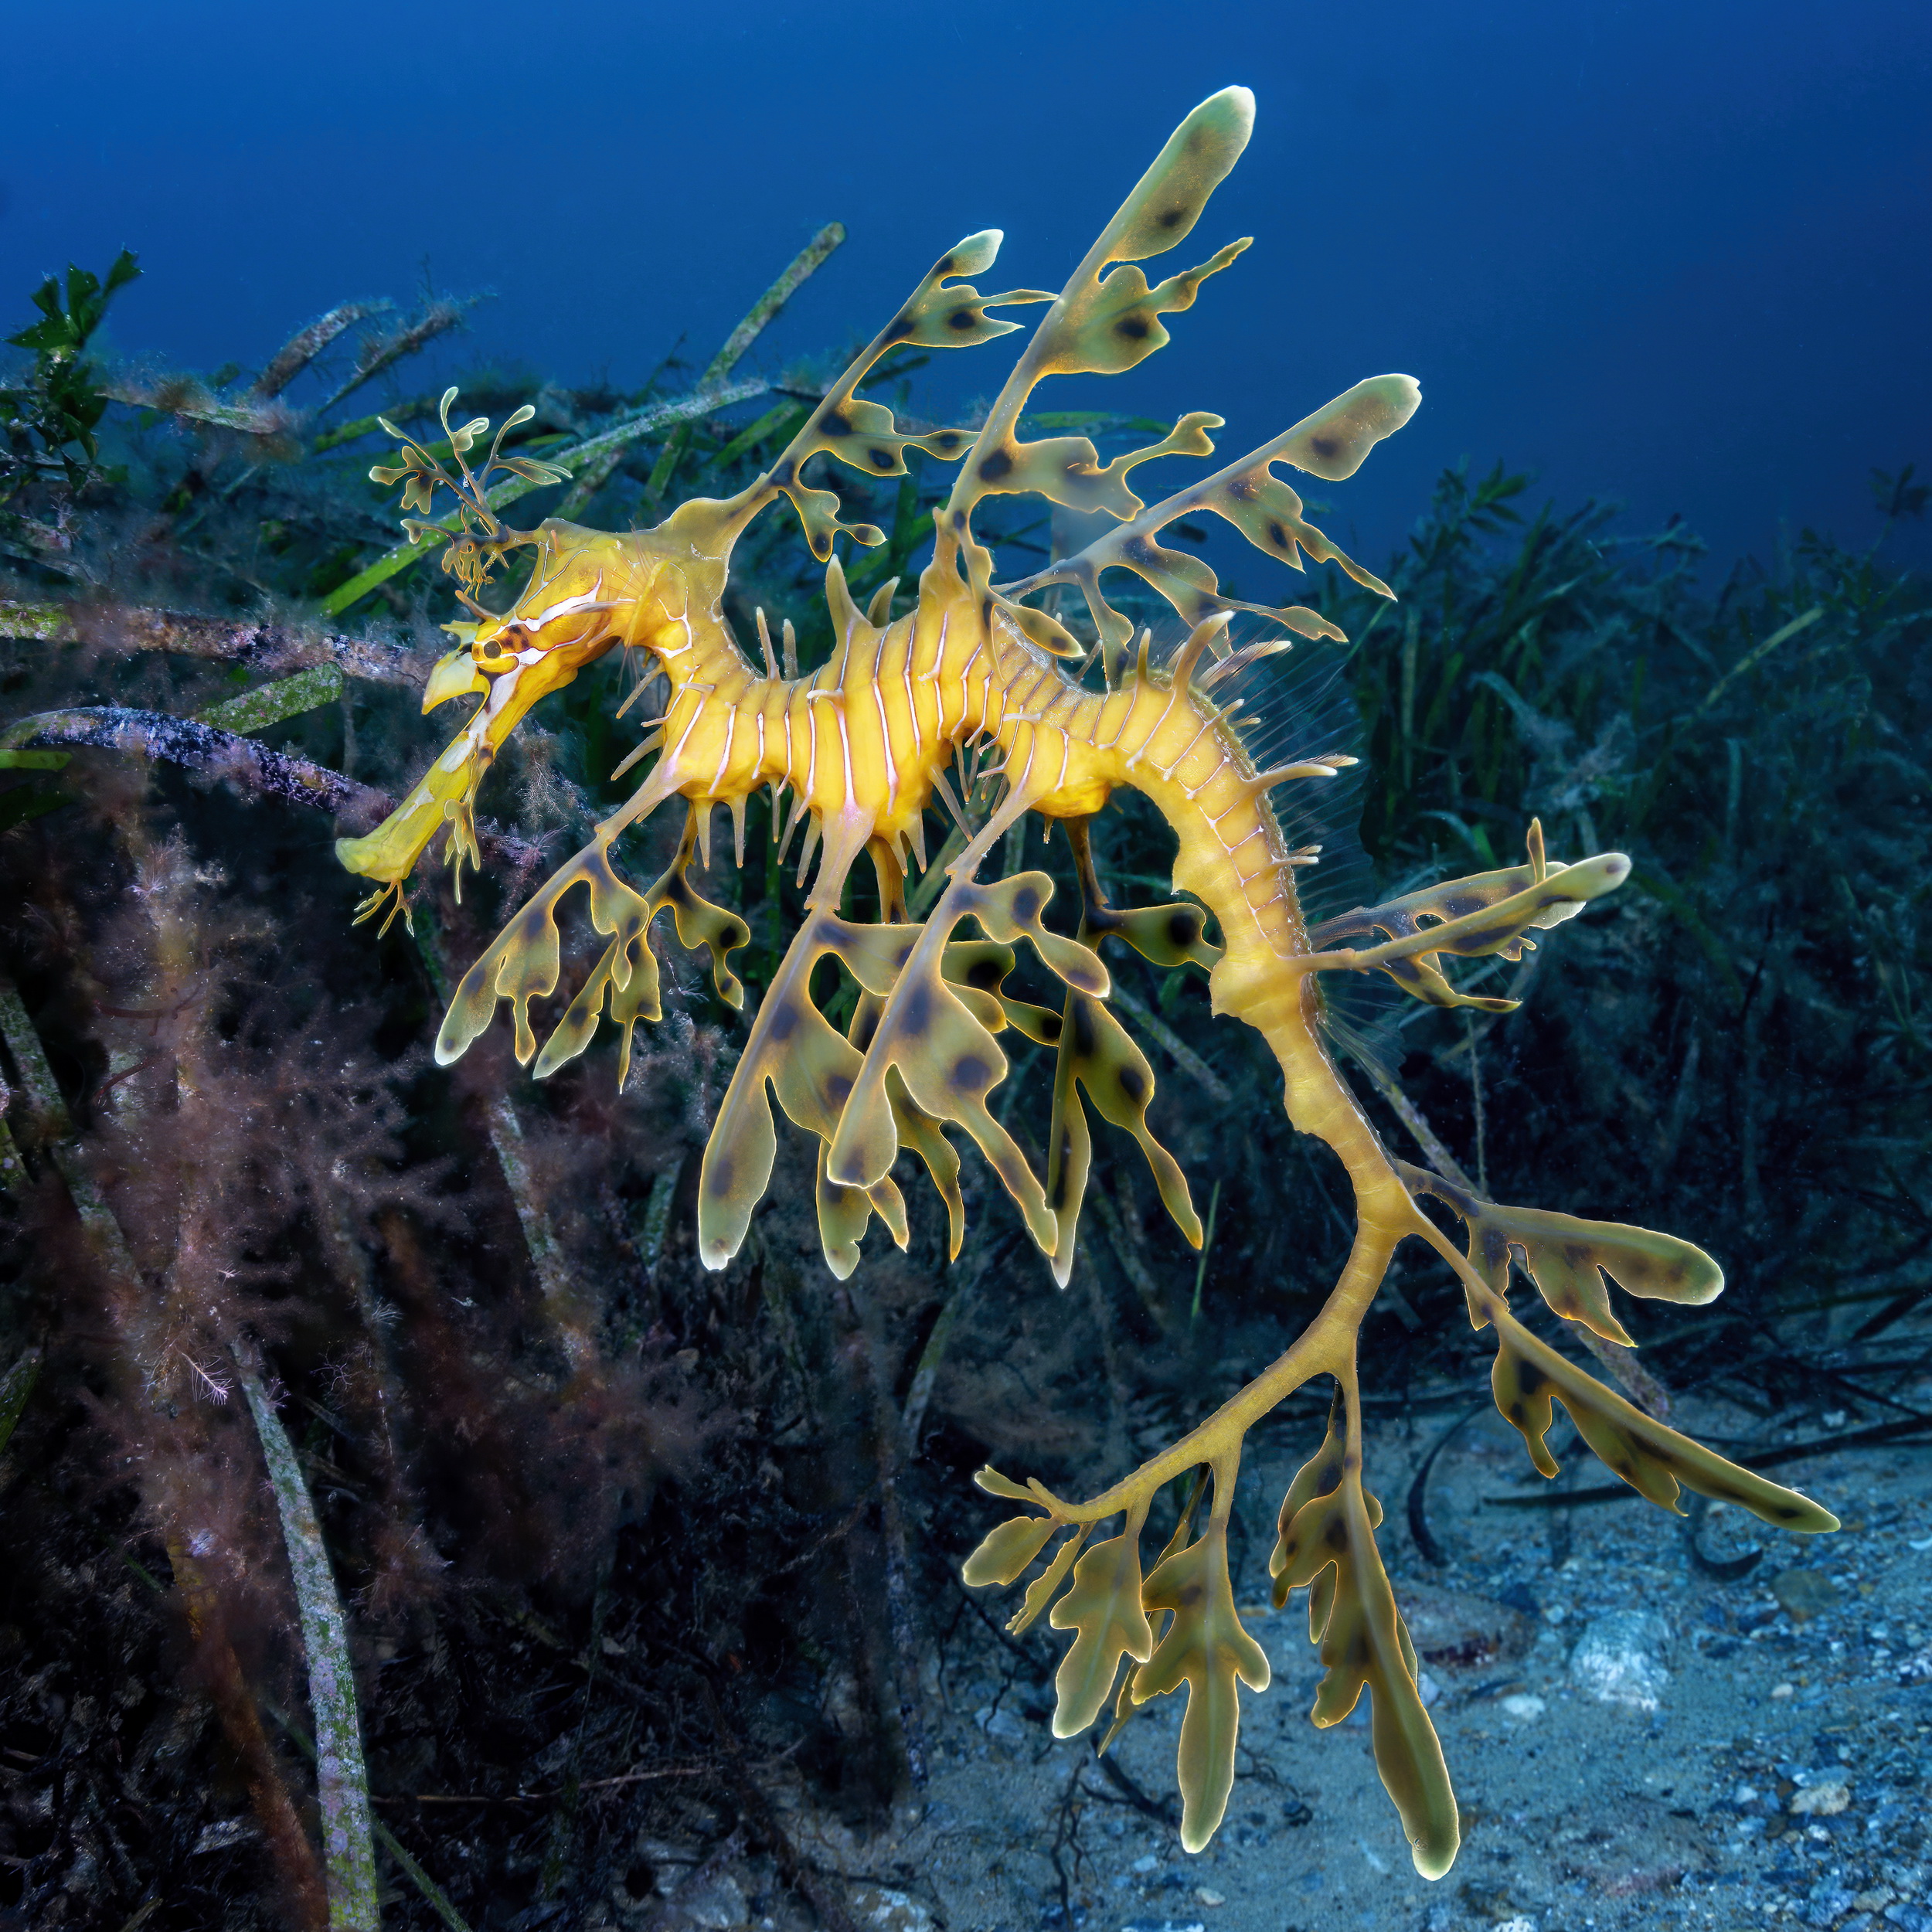 Leafy seadragon at the Tee, Rapid Bay Jetty, South Australia. Photo by Don Silcock